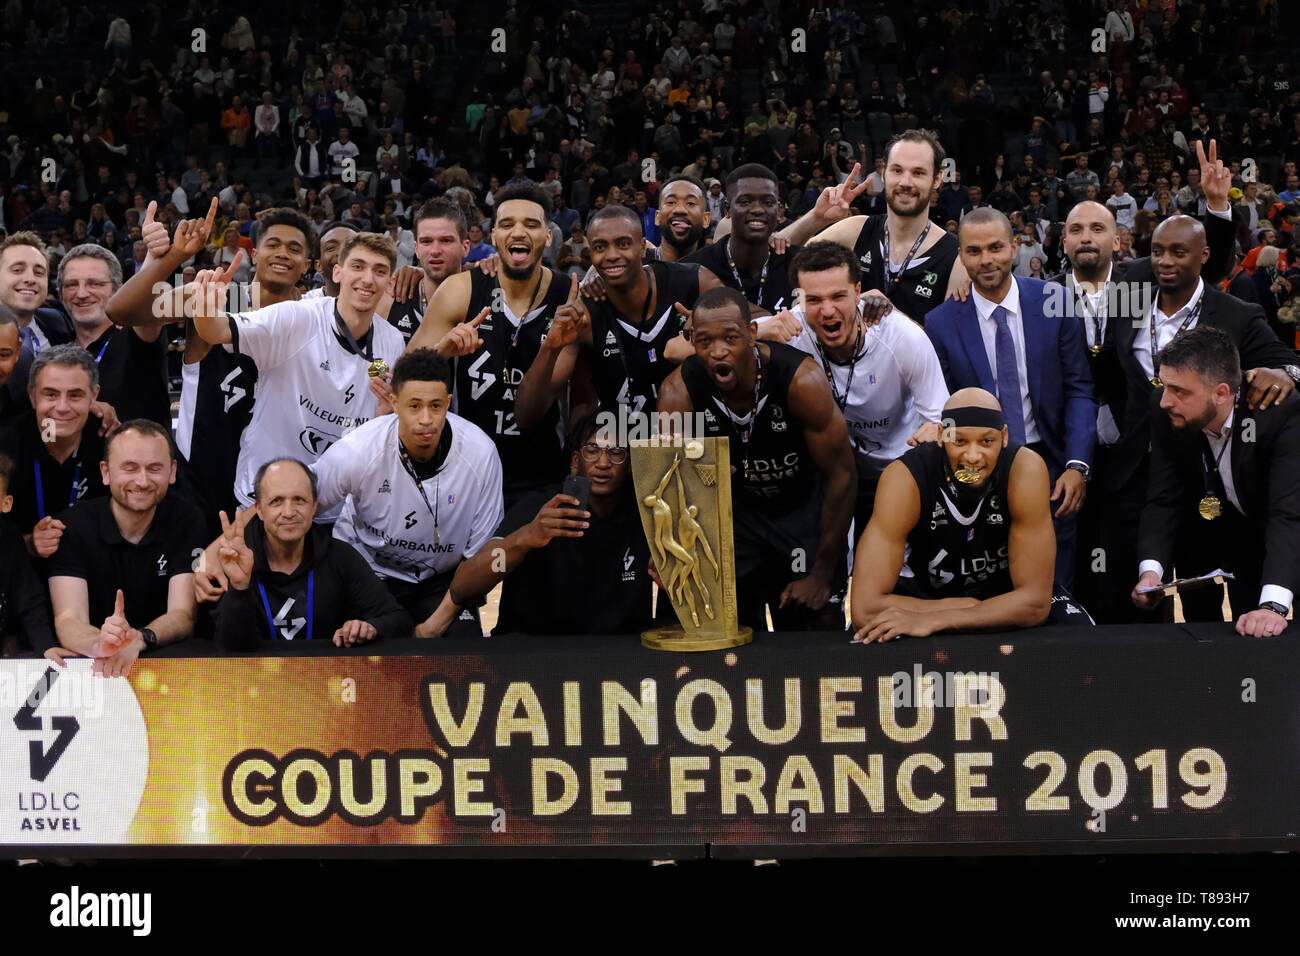 Paris, France. 11th May, 2019. Forward ASVEL CHARLES KAHUDI raises the  trophy for the winner of the French Basketball Cup at the AccorHotel Arena  in Paris - France.LDLC ASVEL won the French